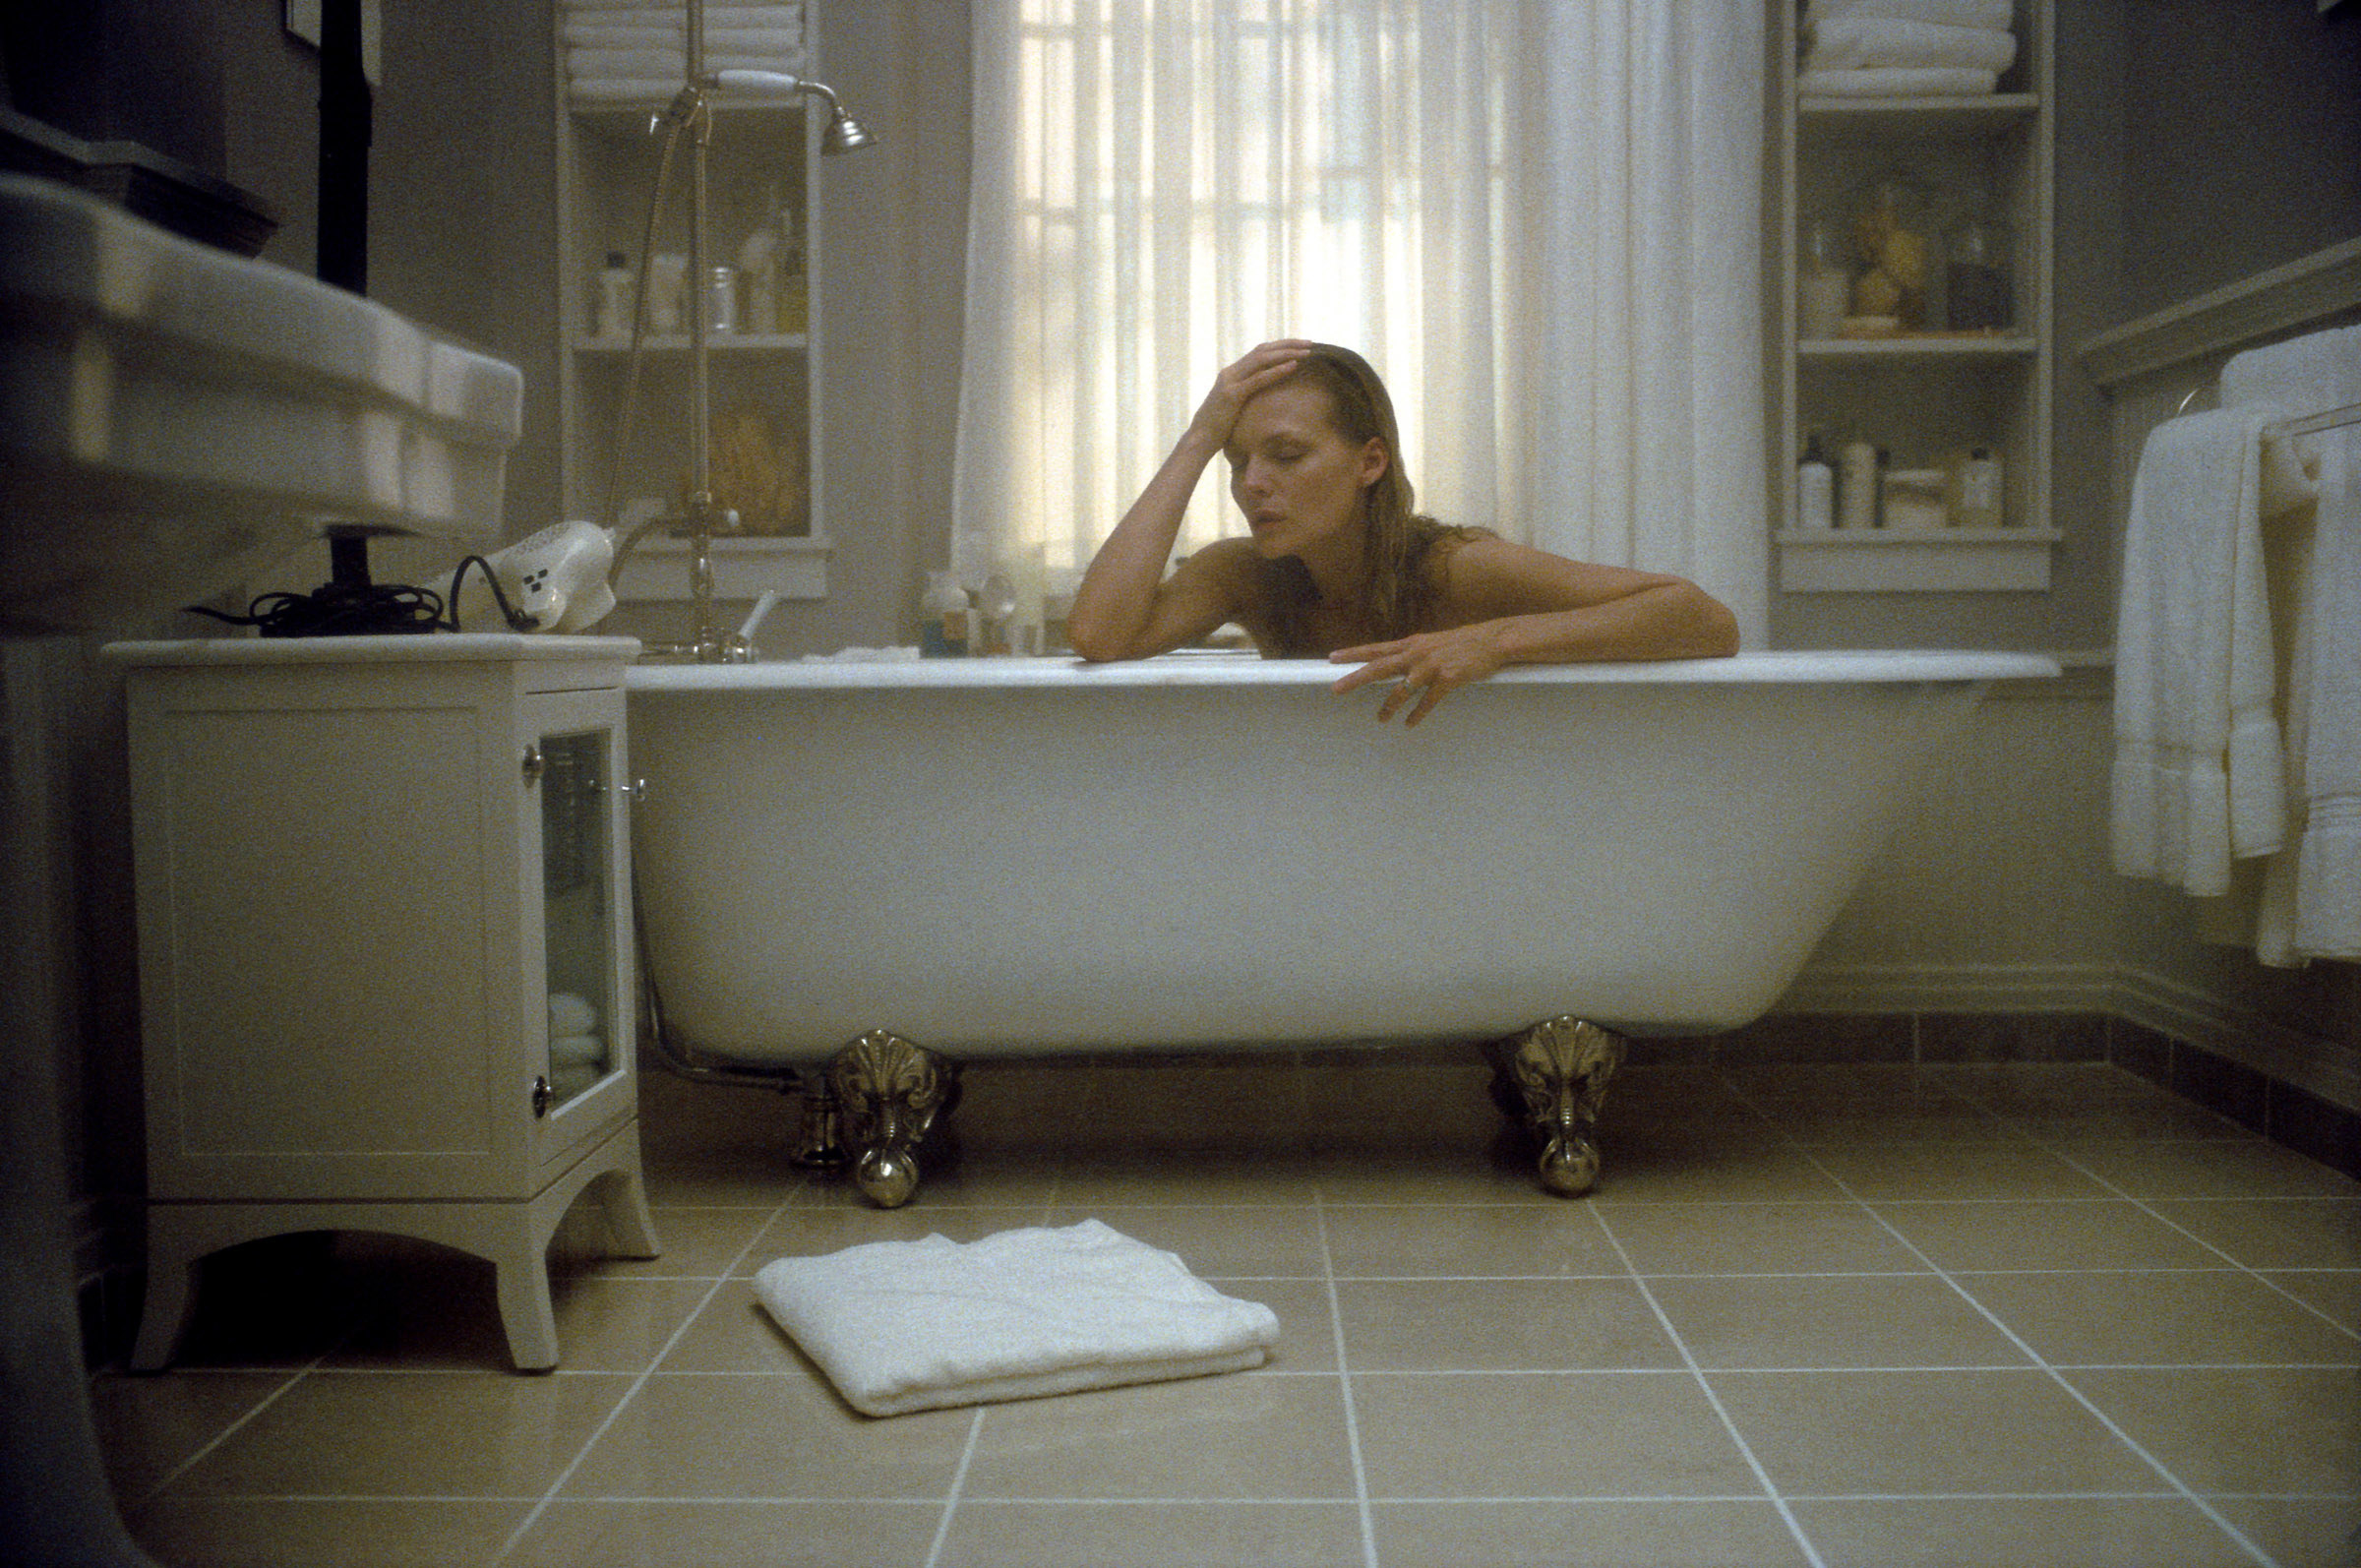 Michelle Pfeiffer sits in a bathtub looking distressed